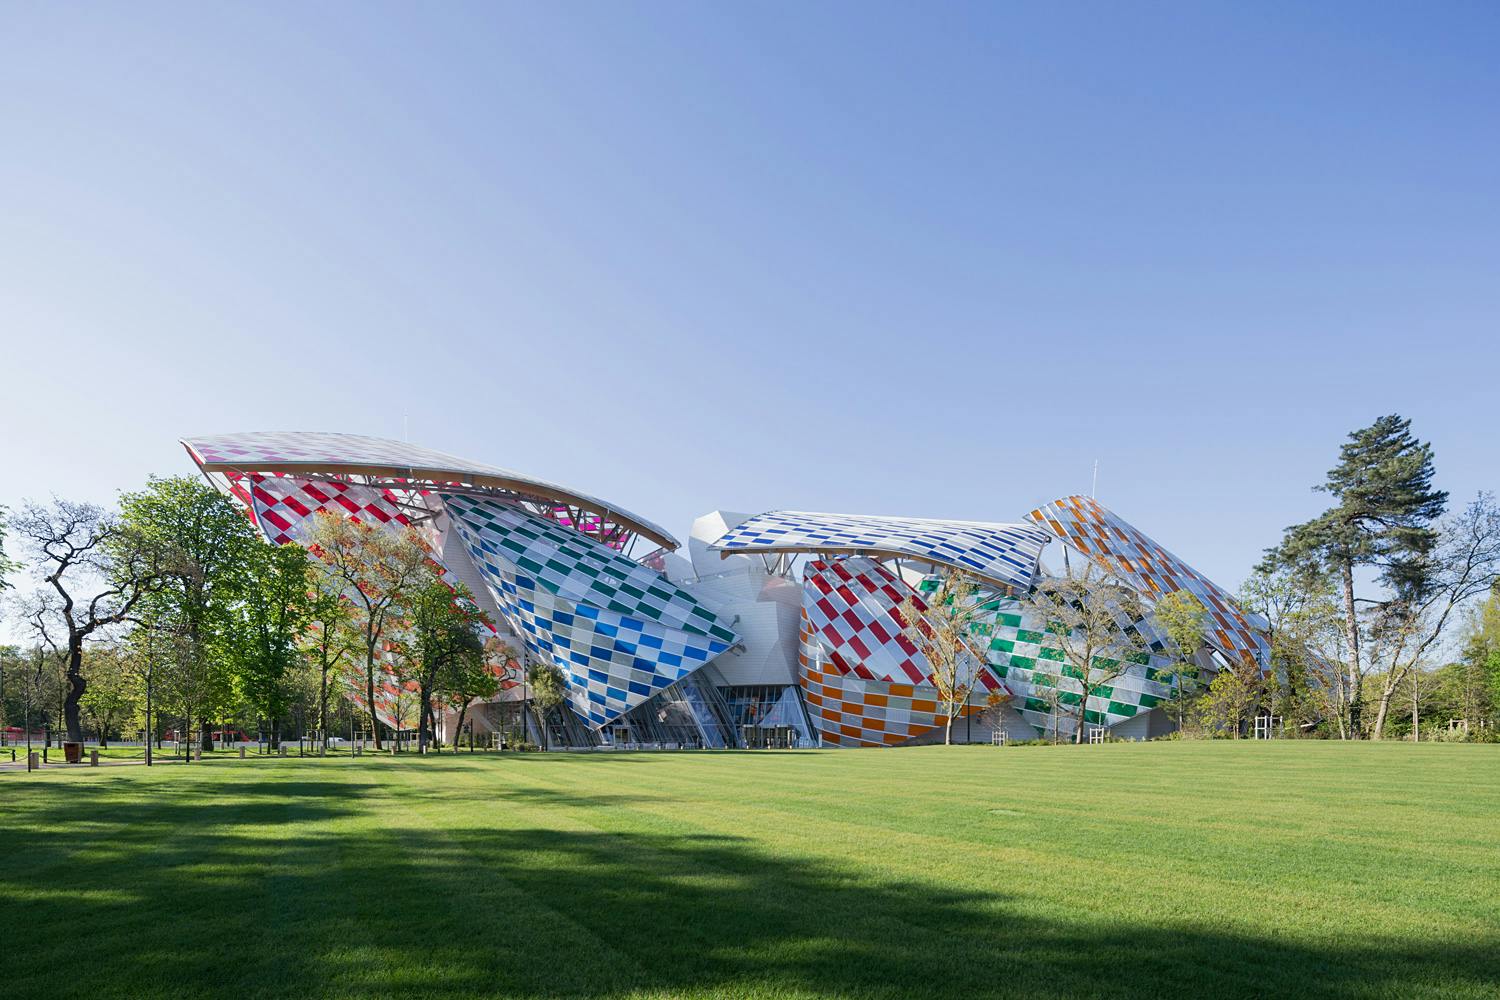 Environmental Activists Target Fondation Louis Vuitton for French